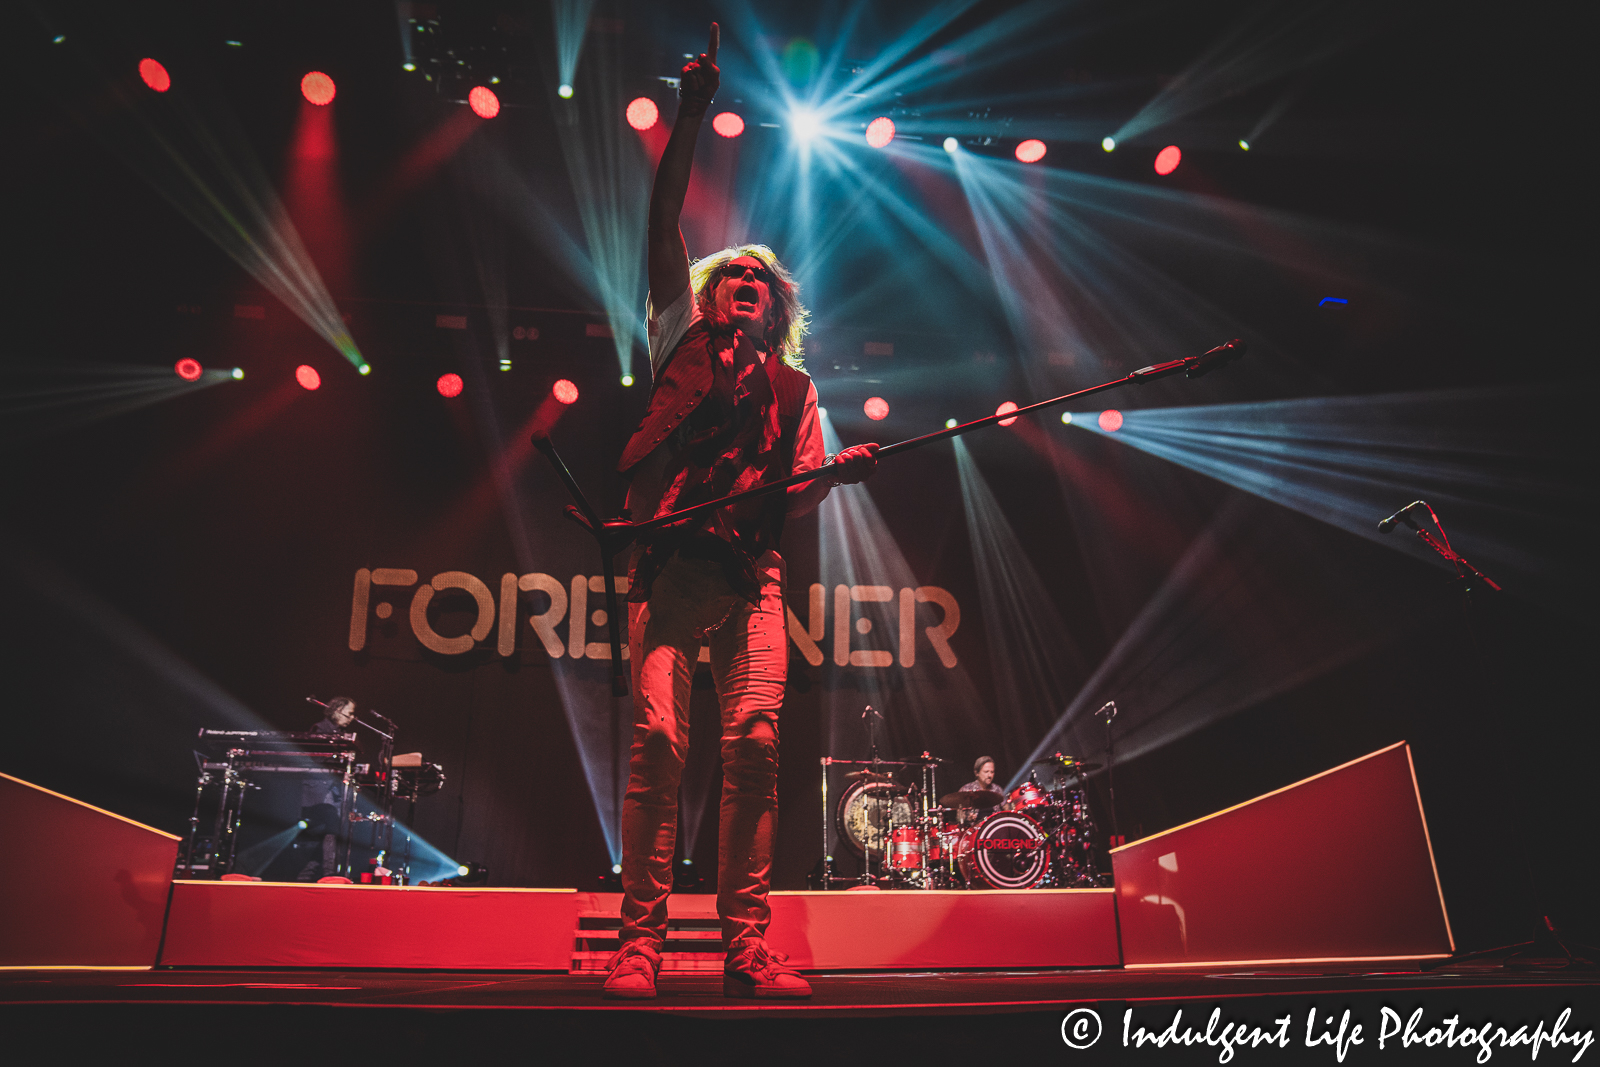 Foreigner lead singer Kelly Hansen performing with keyboard player Michael Bluestein and drummer Chris Frazier at Stormont Vail Events Center in Topeka, KS on May 2, 2023.